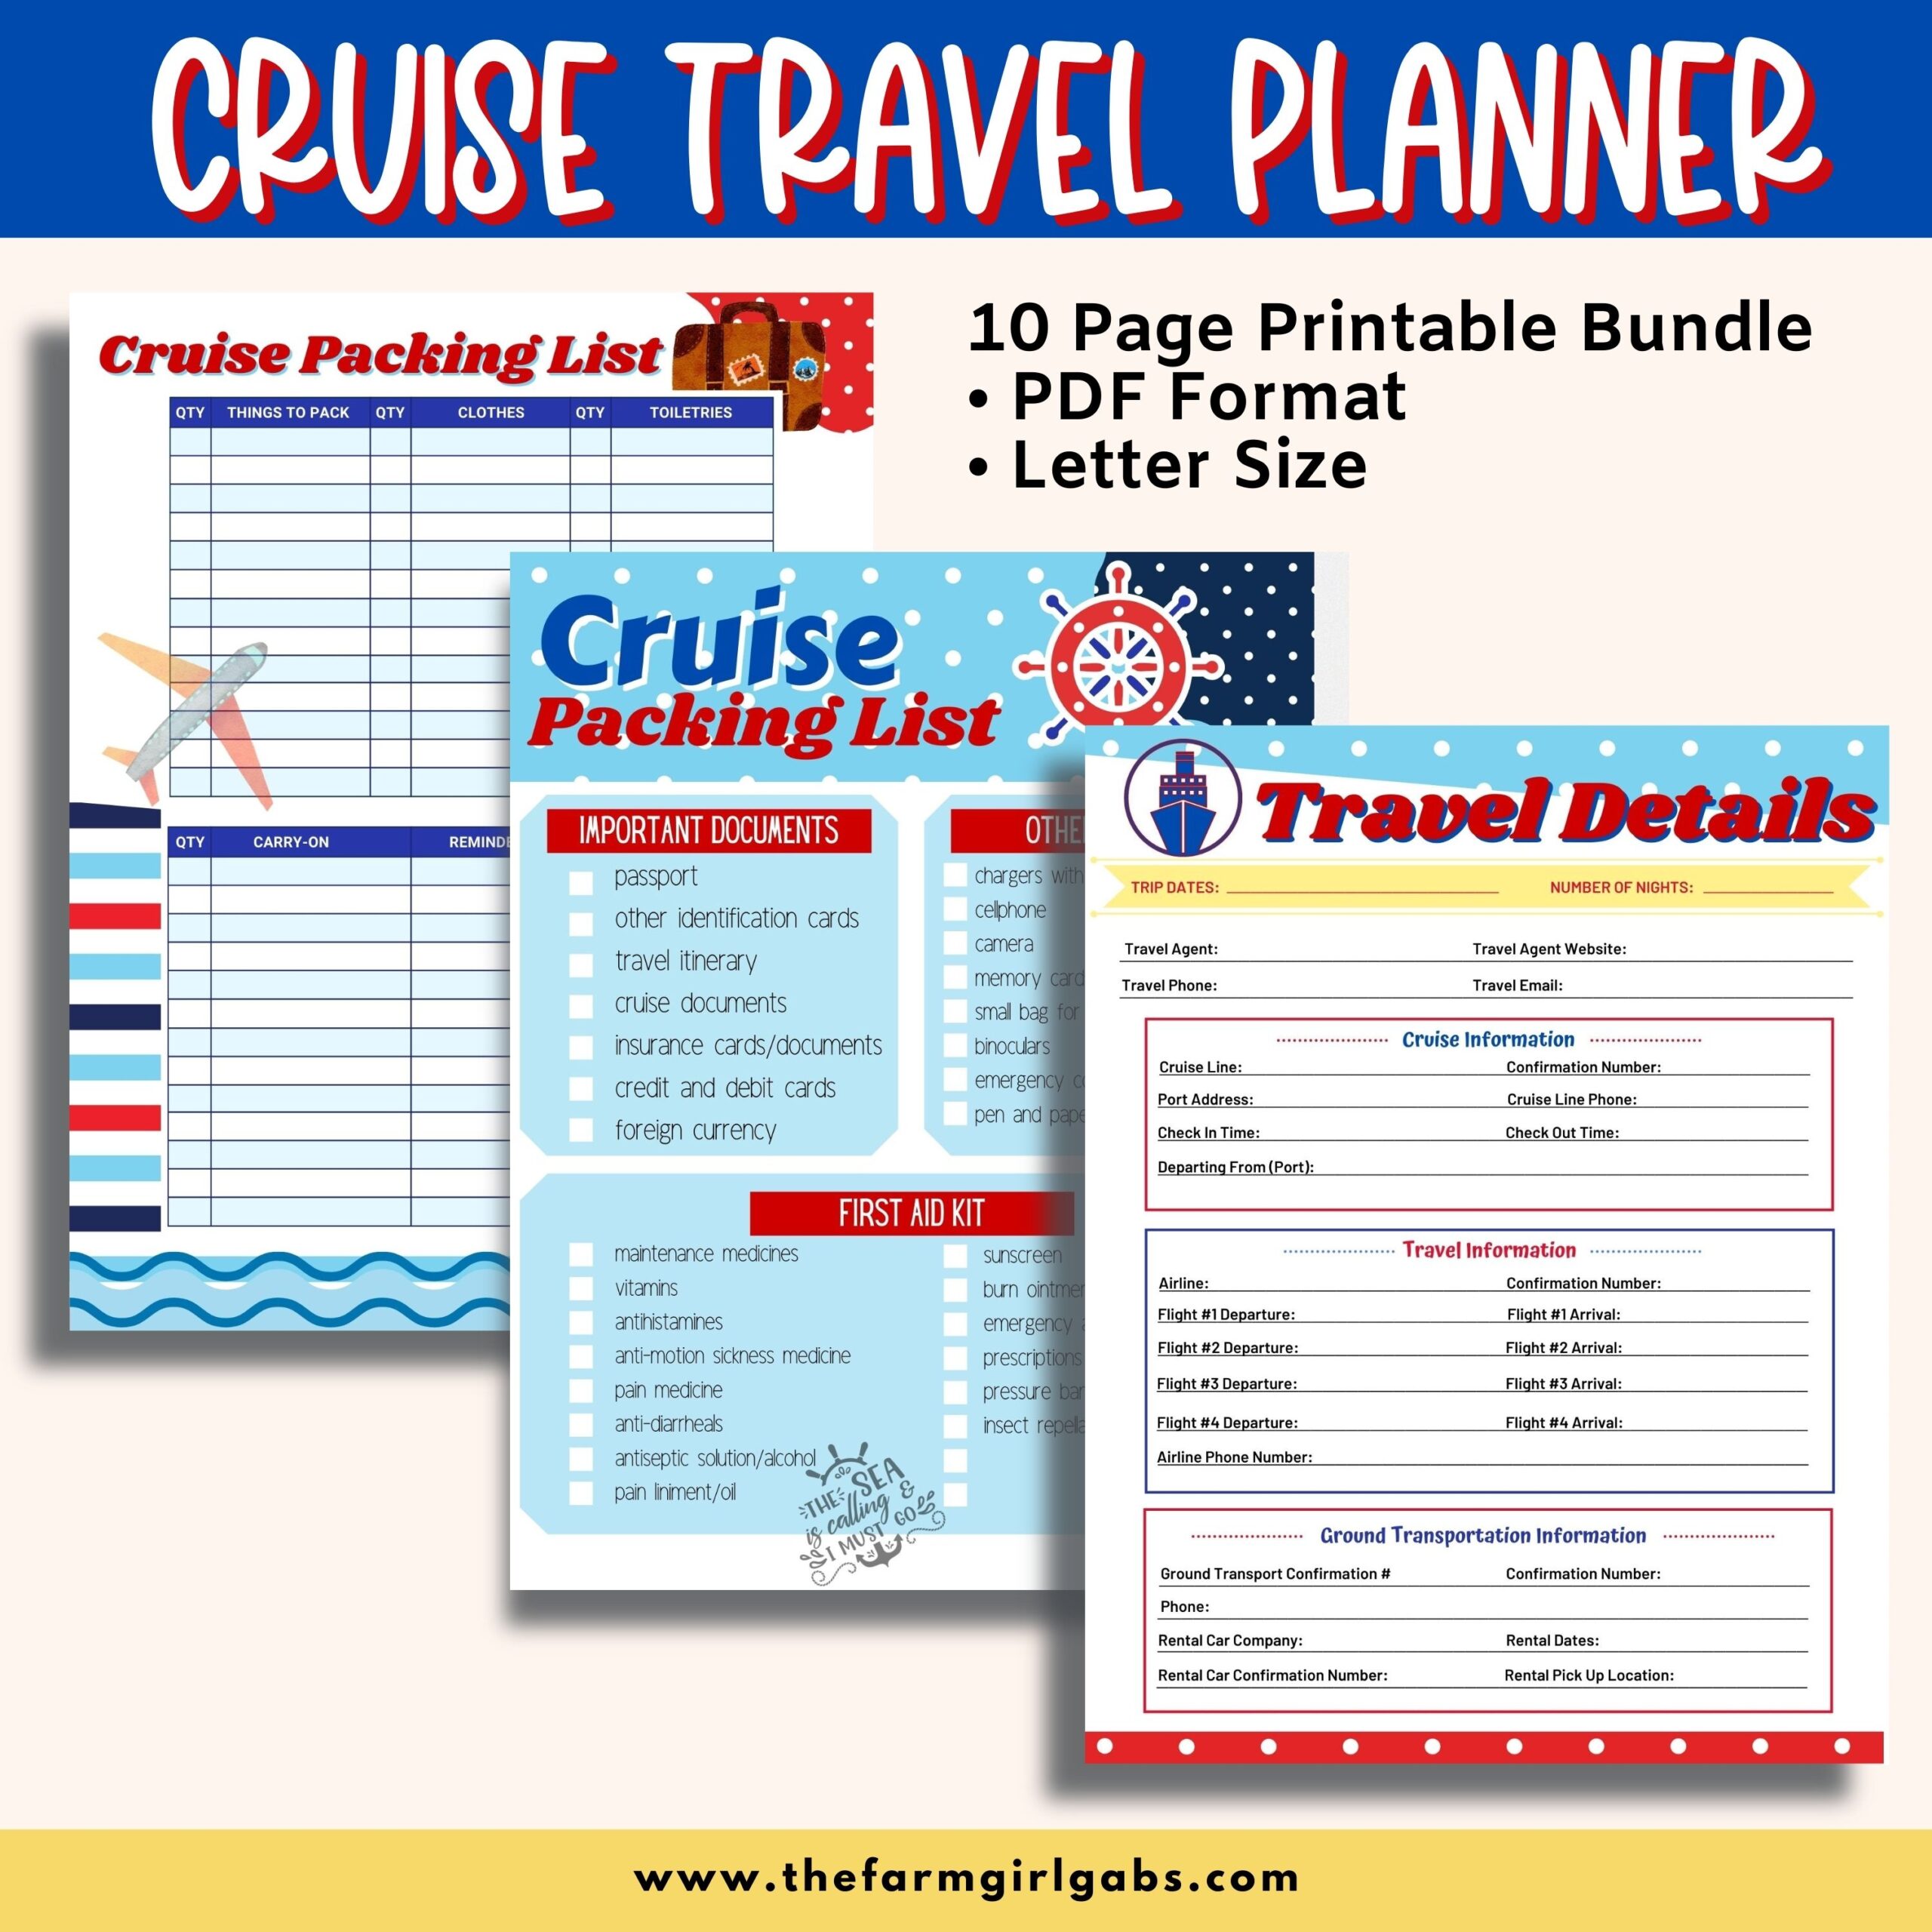 cruise ship event planner jobs